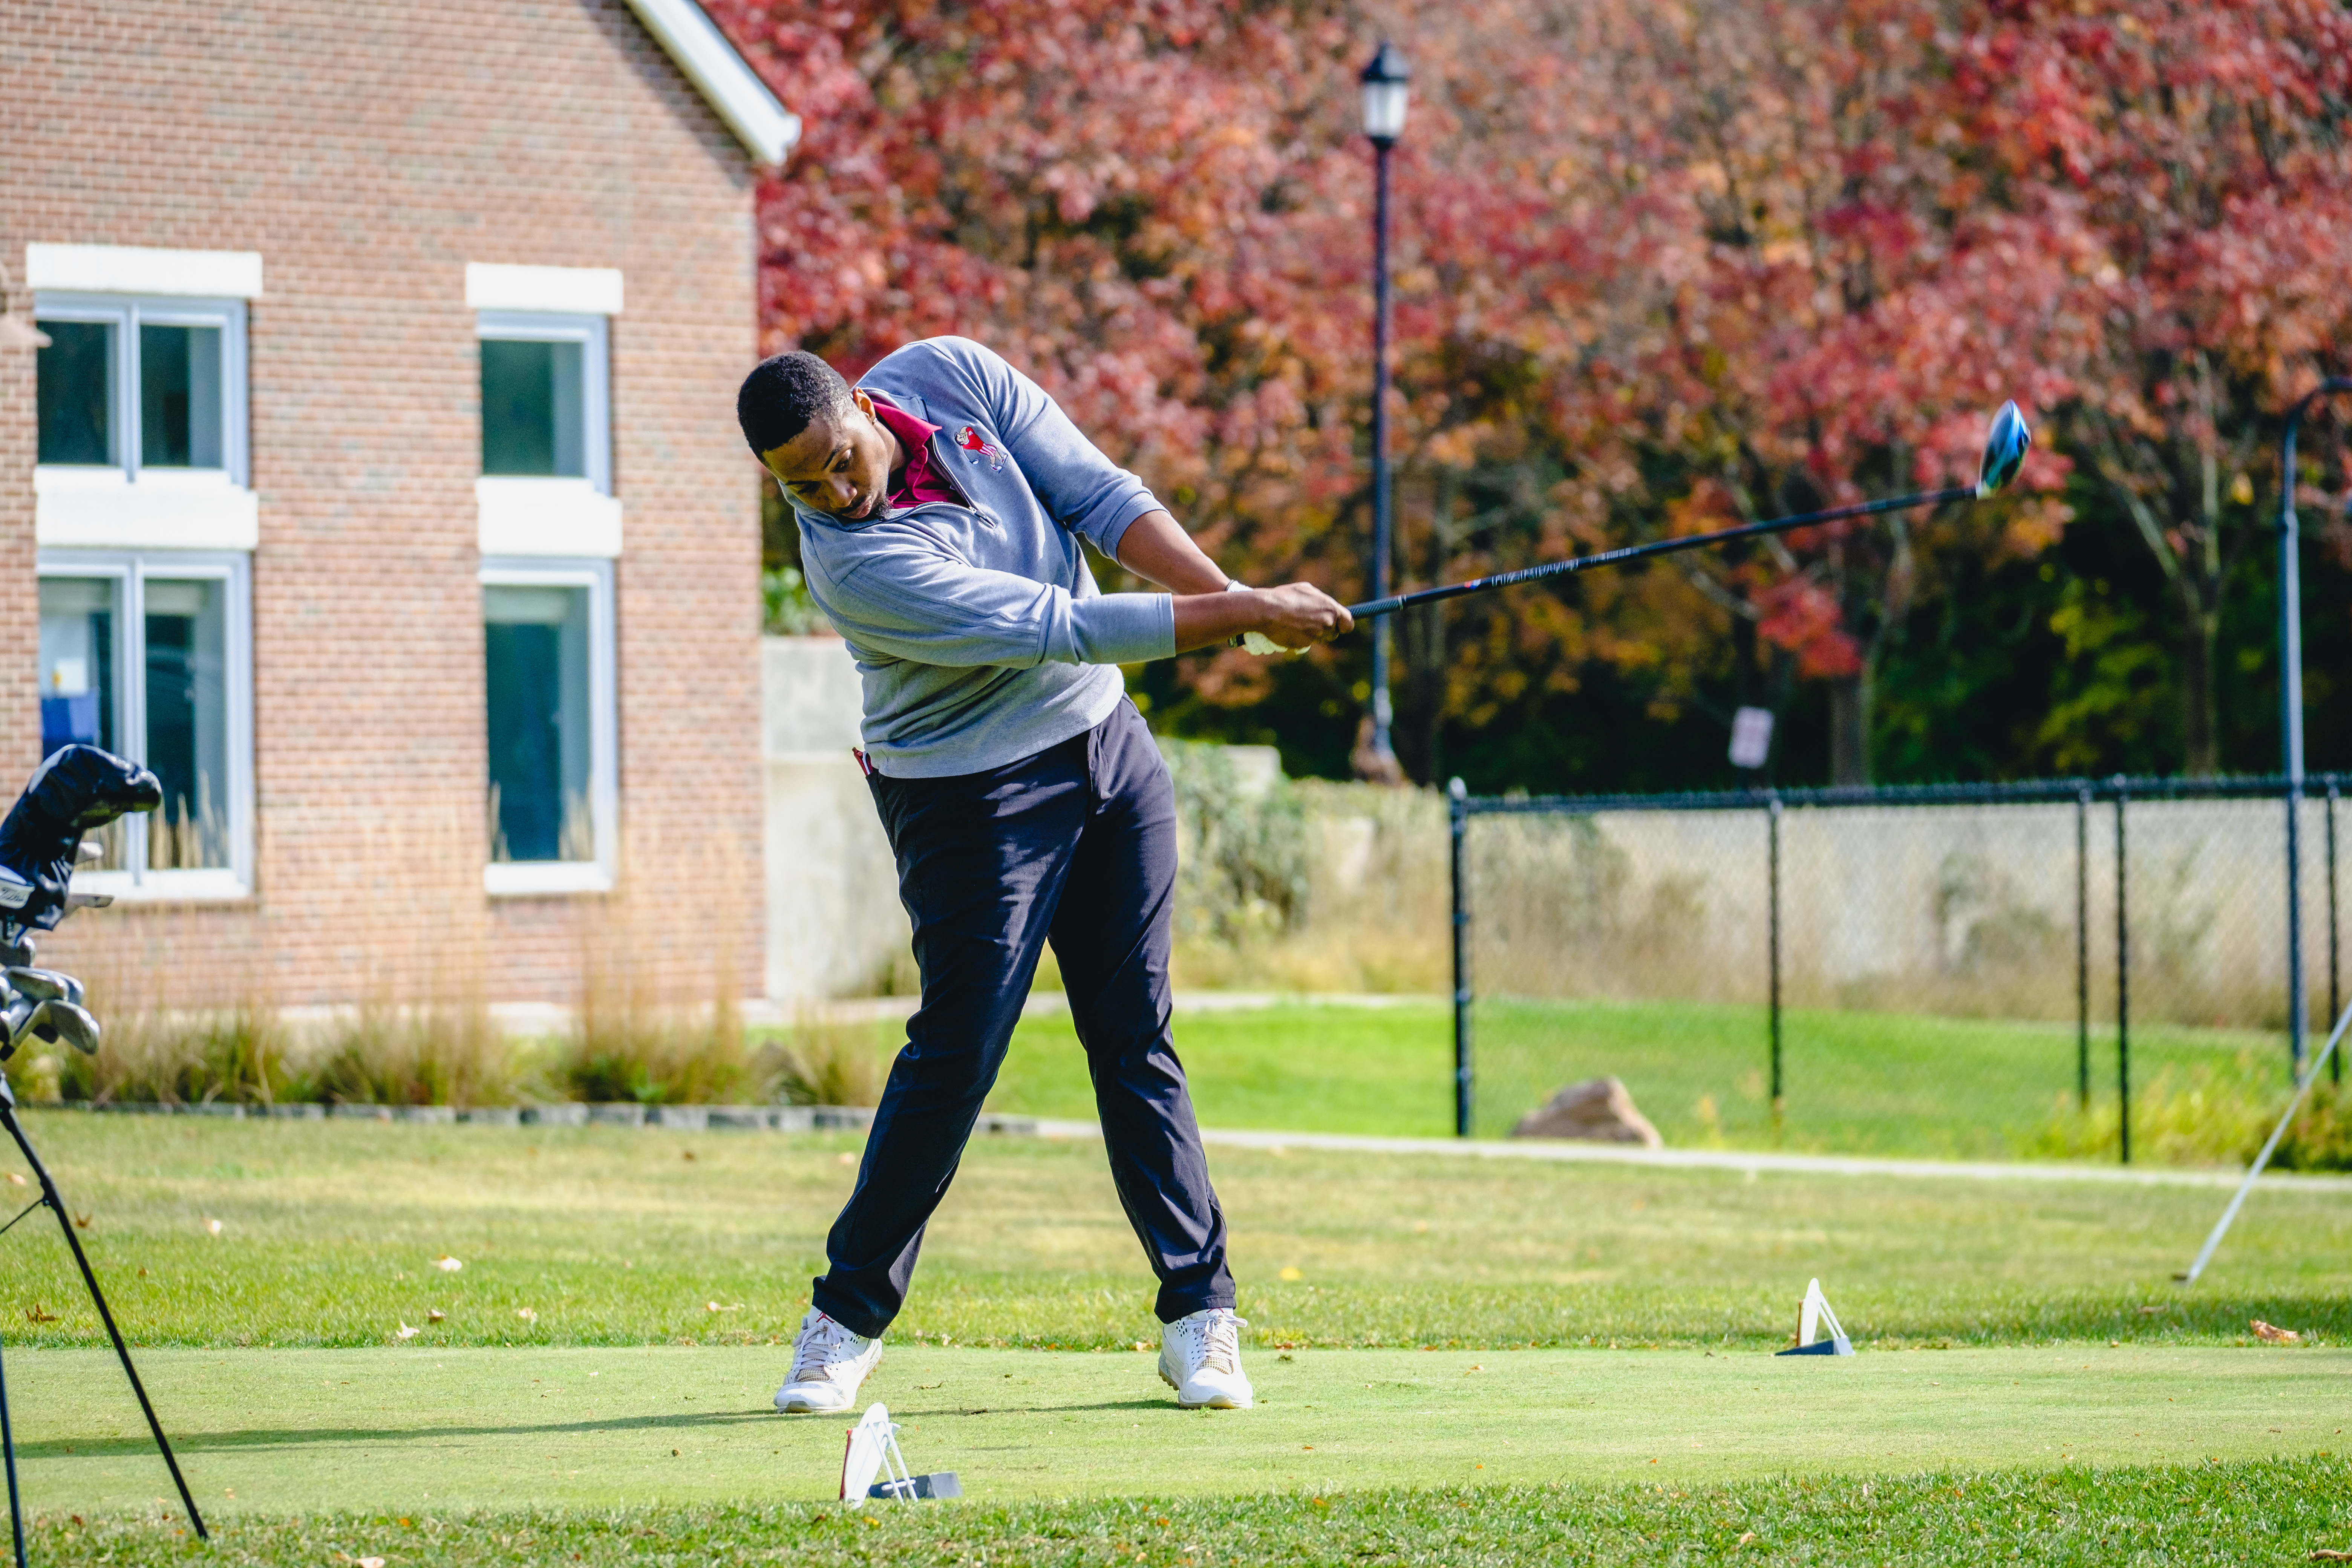 Johnson has distinguished himself at Wabash through a variety of campus leadership roles and academic achievement, including being a four-year member of the Wabash golf team. 